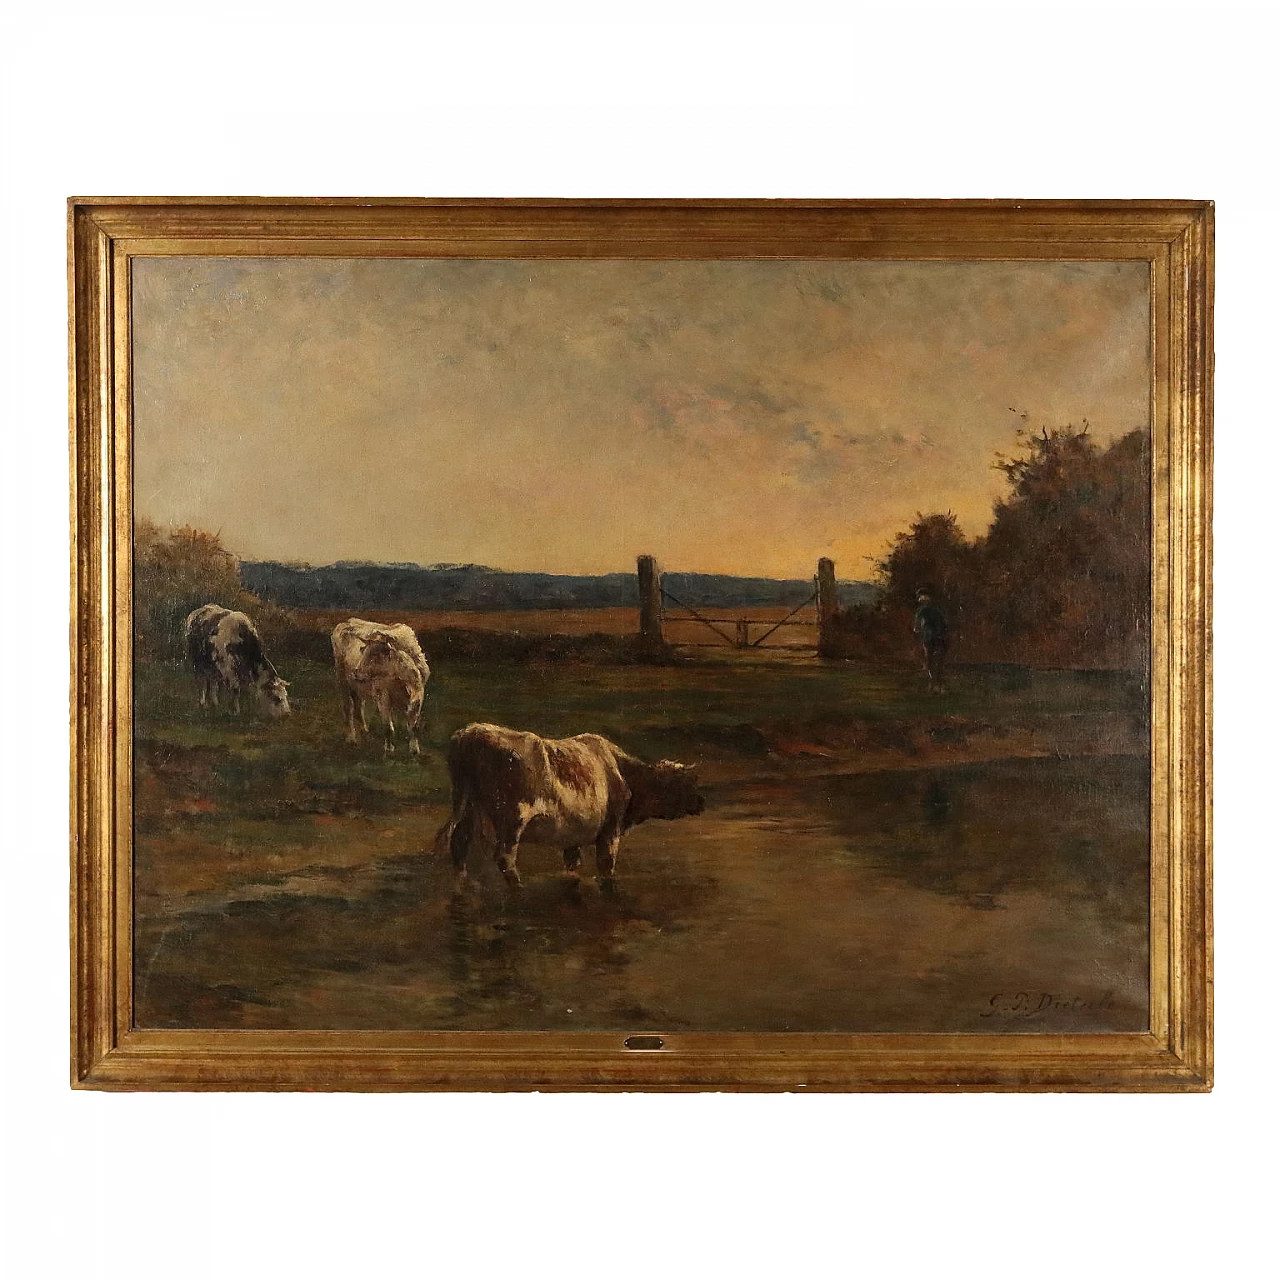 G. Pier Dieterle, Glimpse of countryside with cows, oil on canvas 1